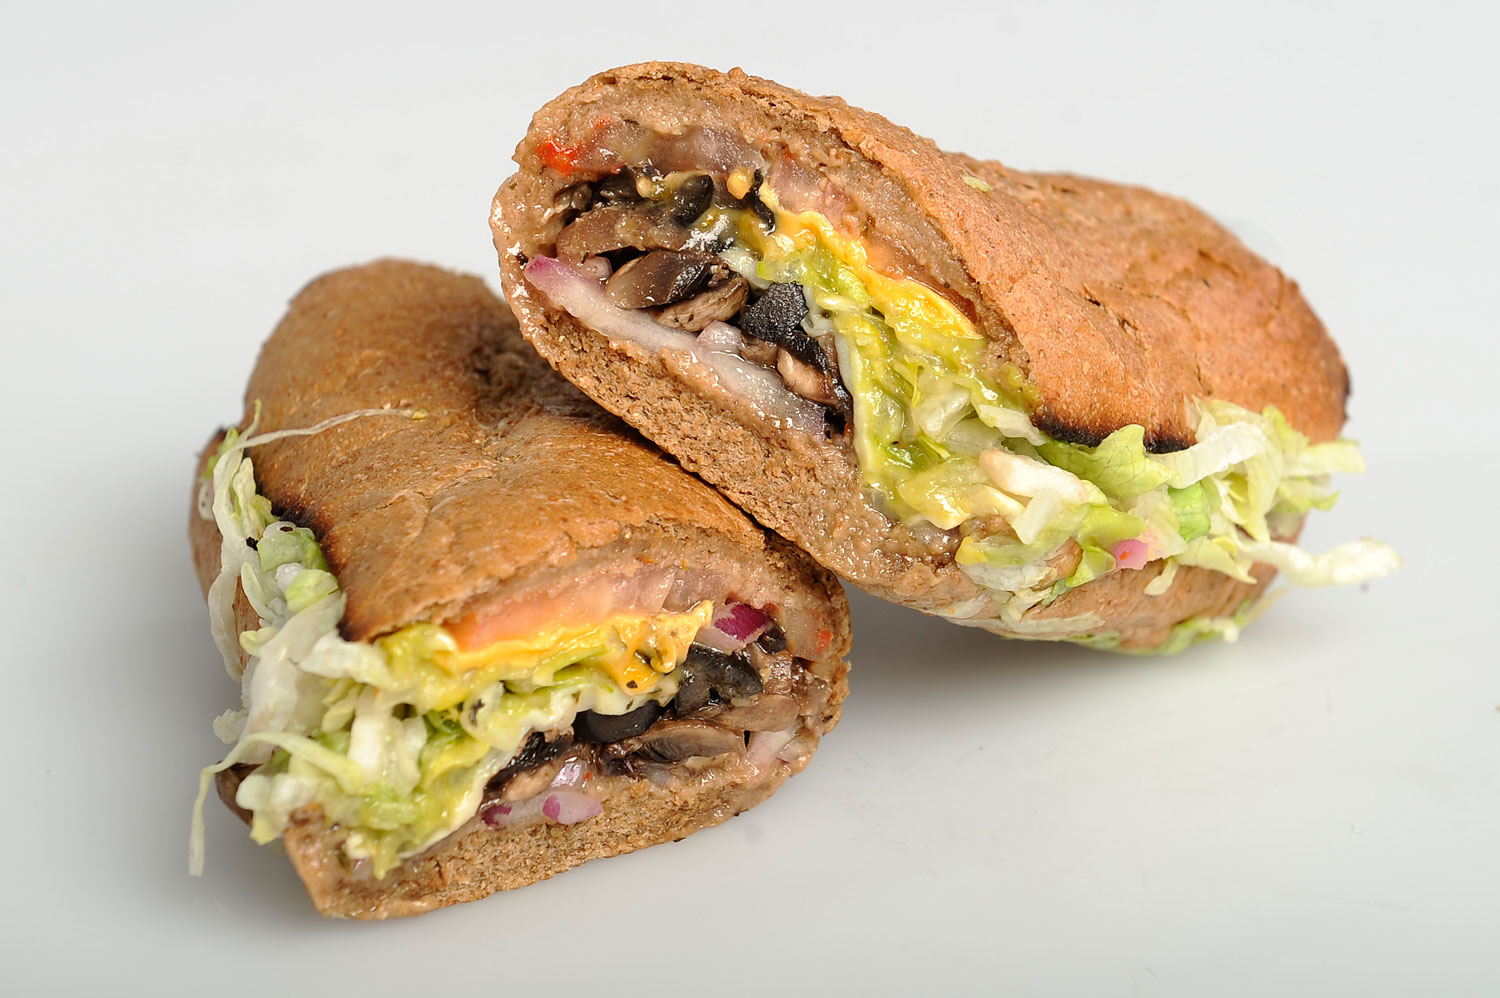 A veggie sub from Quiznos. (Carlos Osorio—Toronto Star/Getty Images)